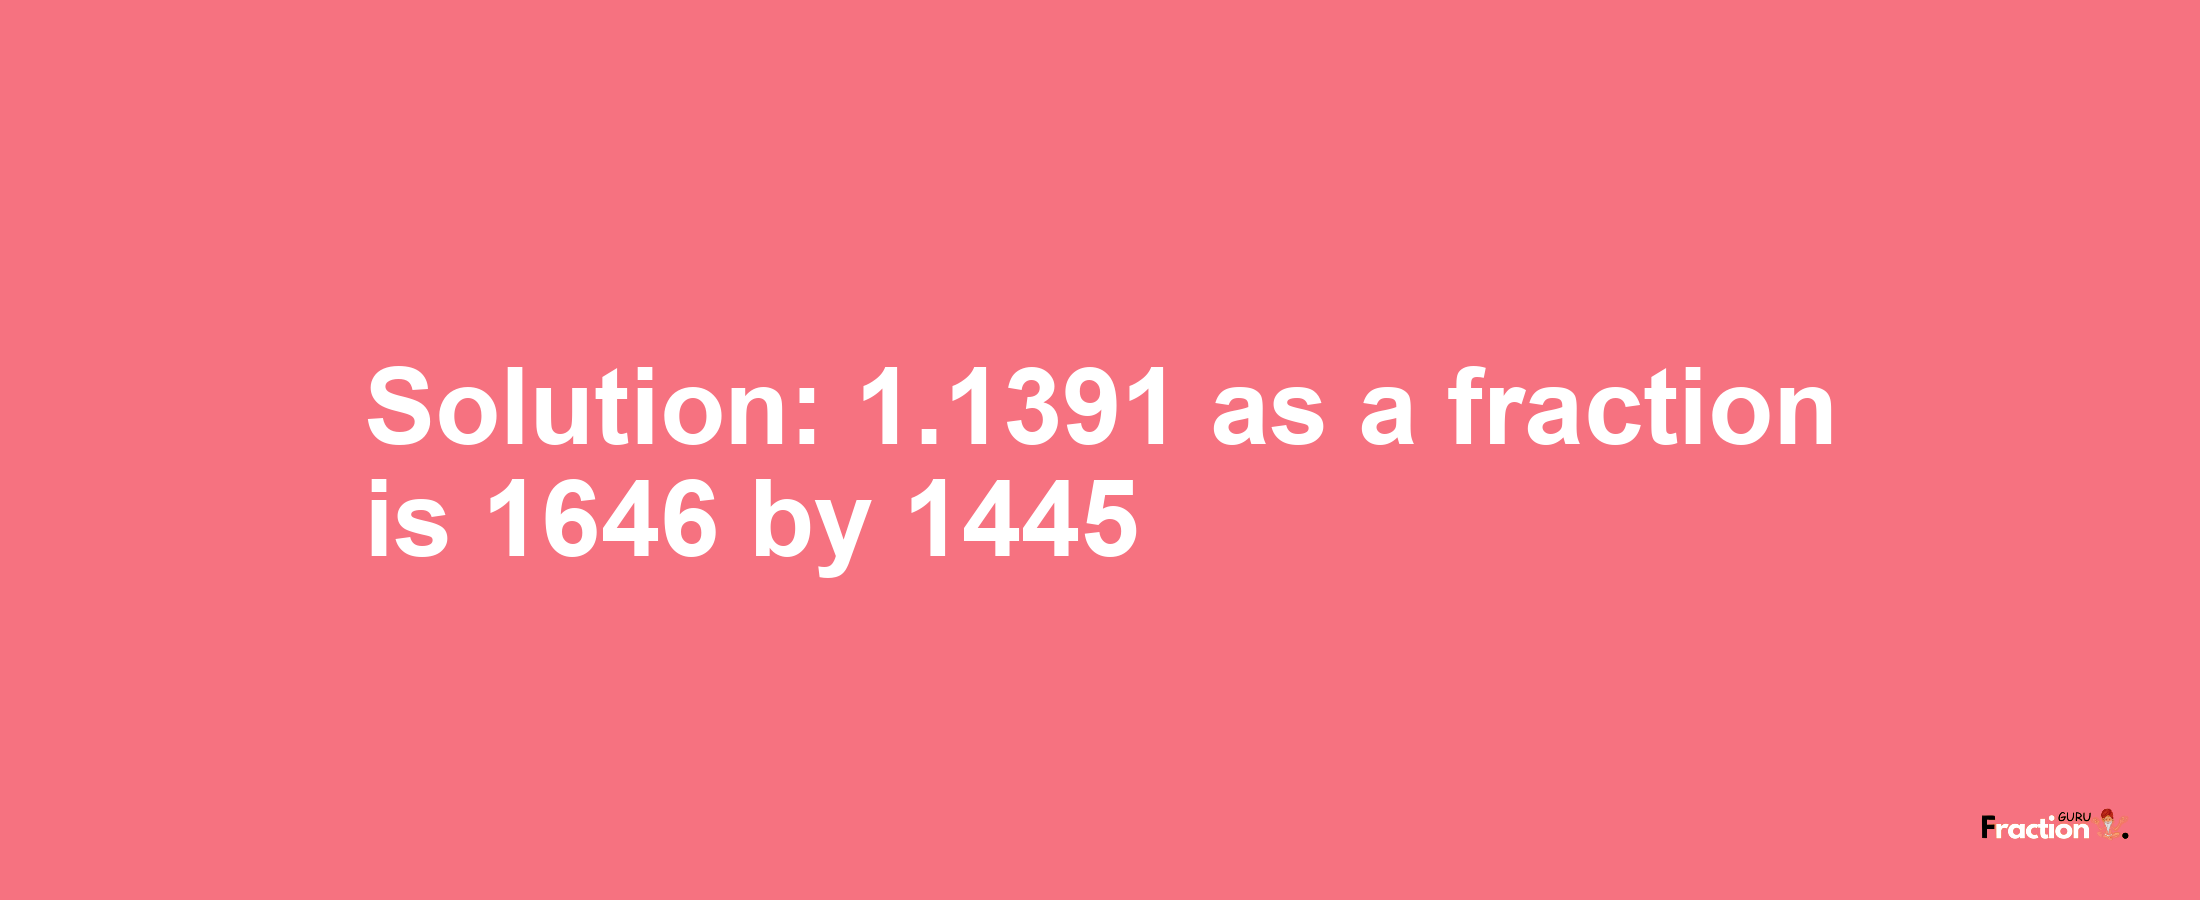 Solution:1.1391 as a fraction is 1646/1445